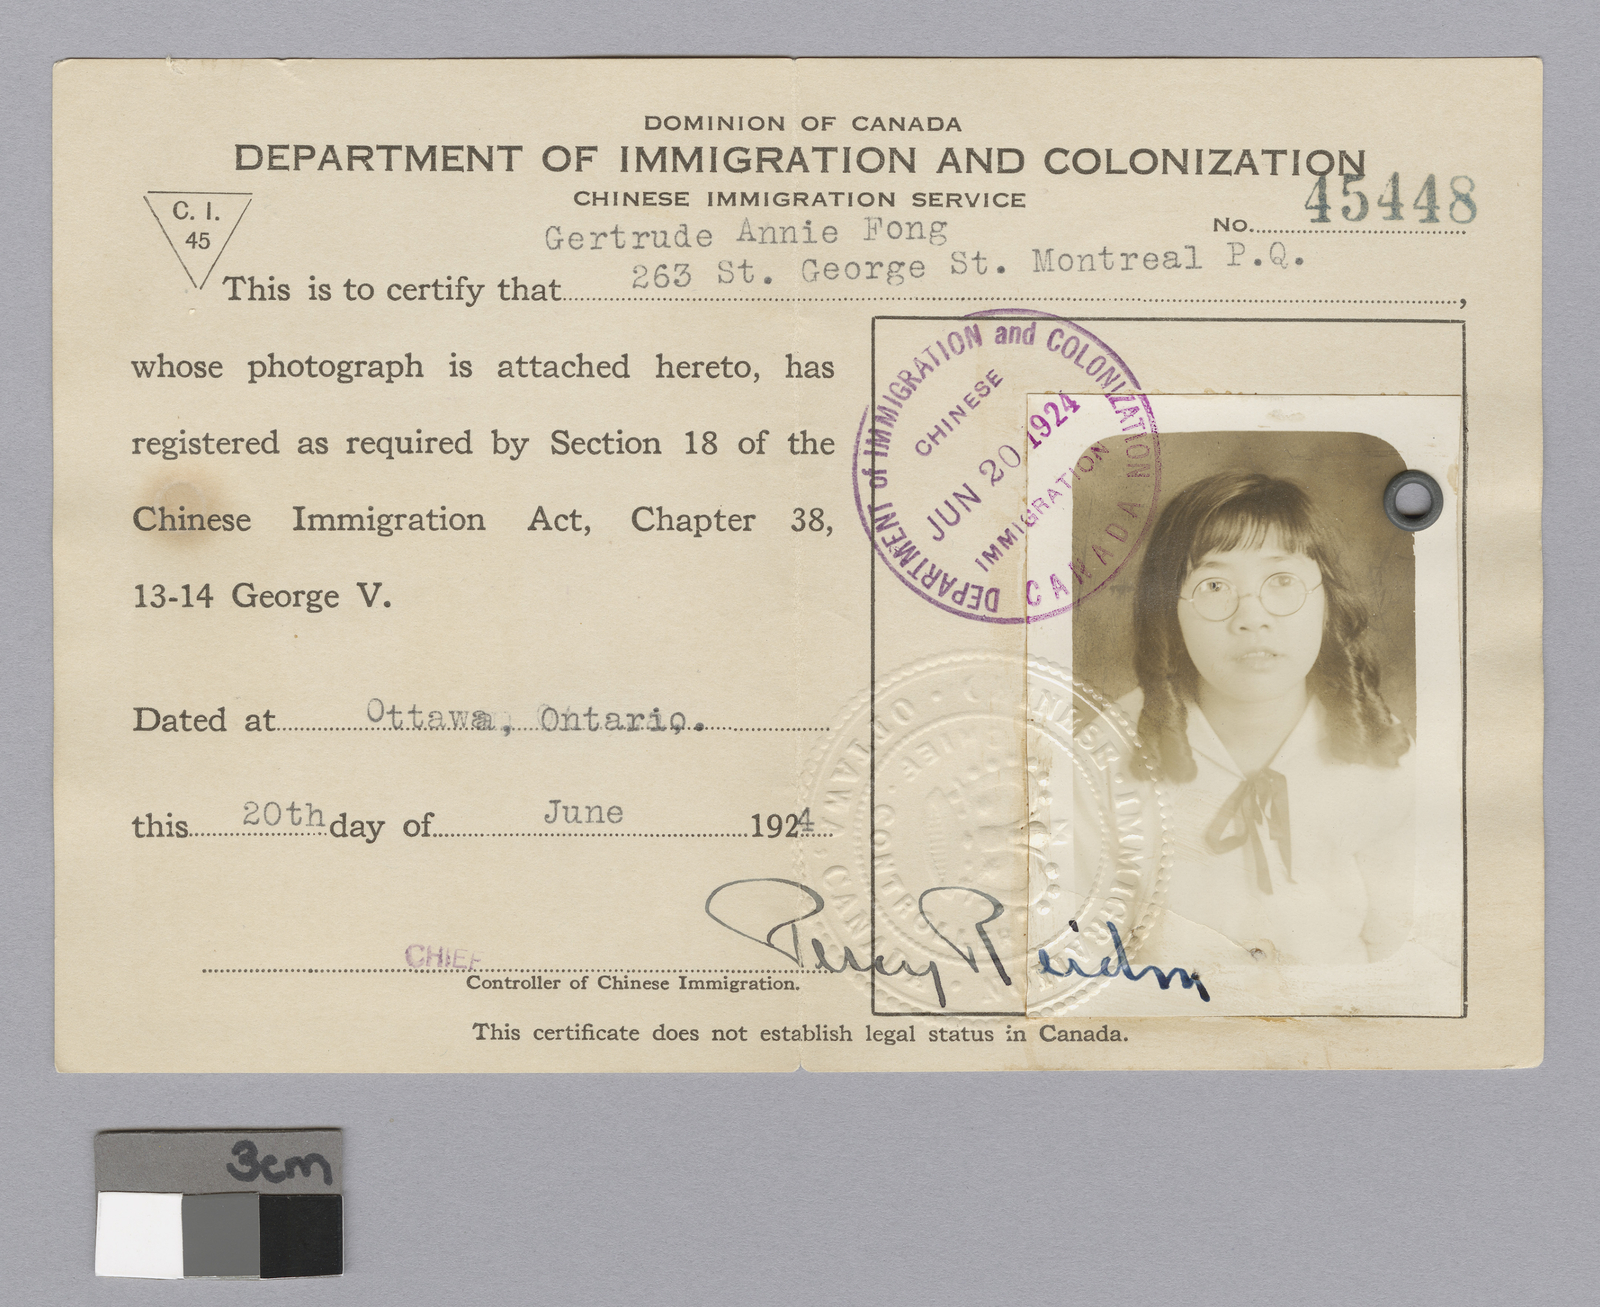 Department of Immigration and Colonization card for Gertrude Fong